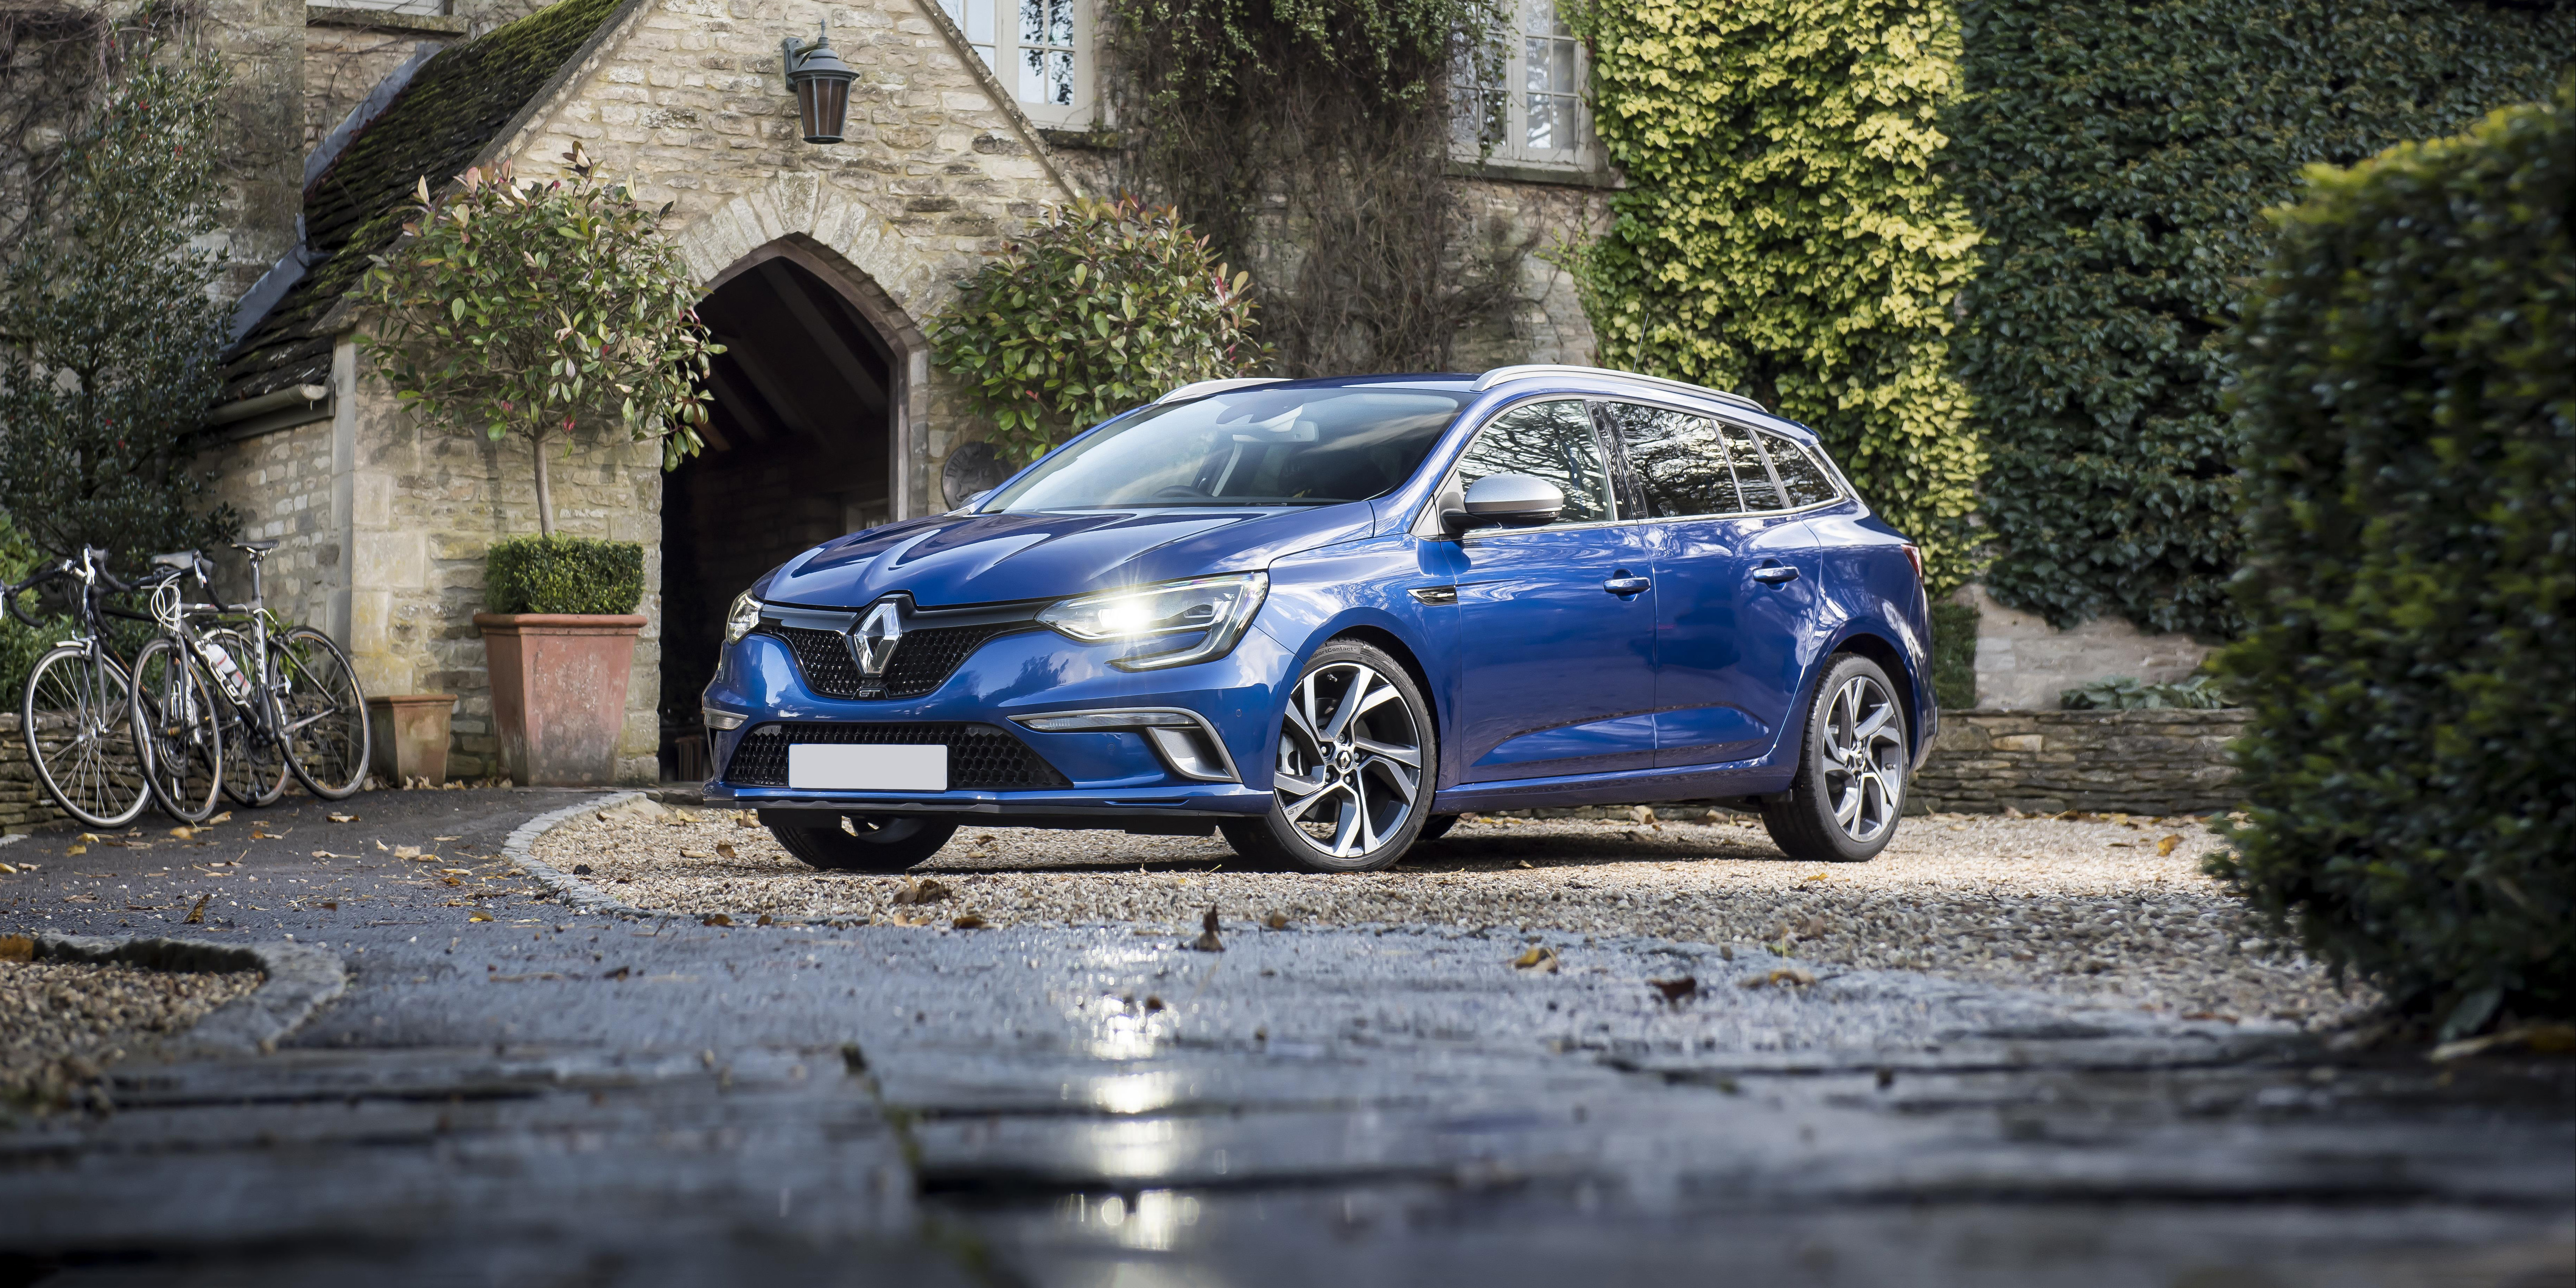 Renault Megane Sports Tourer Review | Drive, Specs & Pricing | carwow